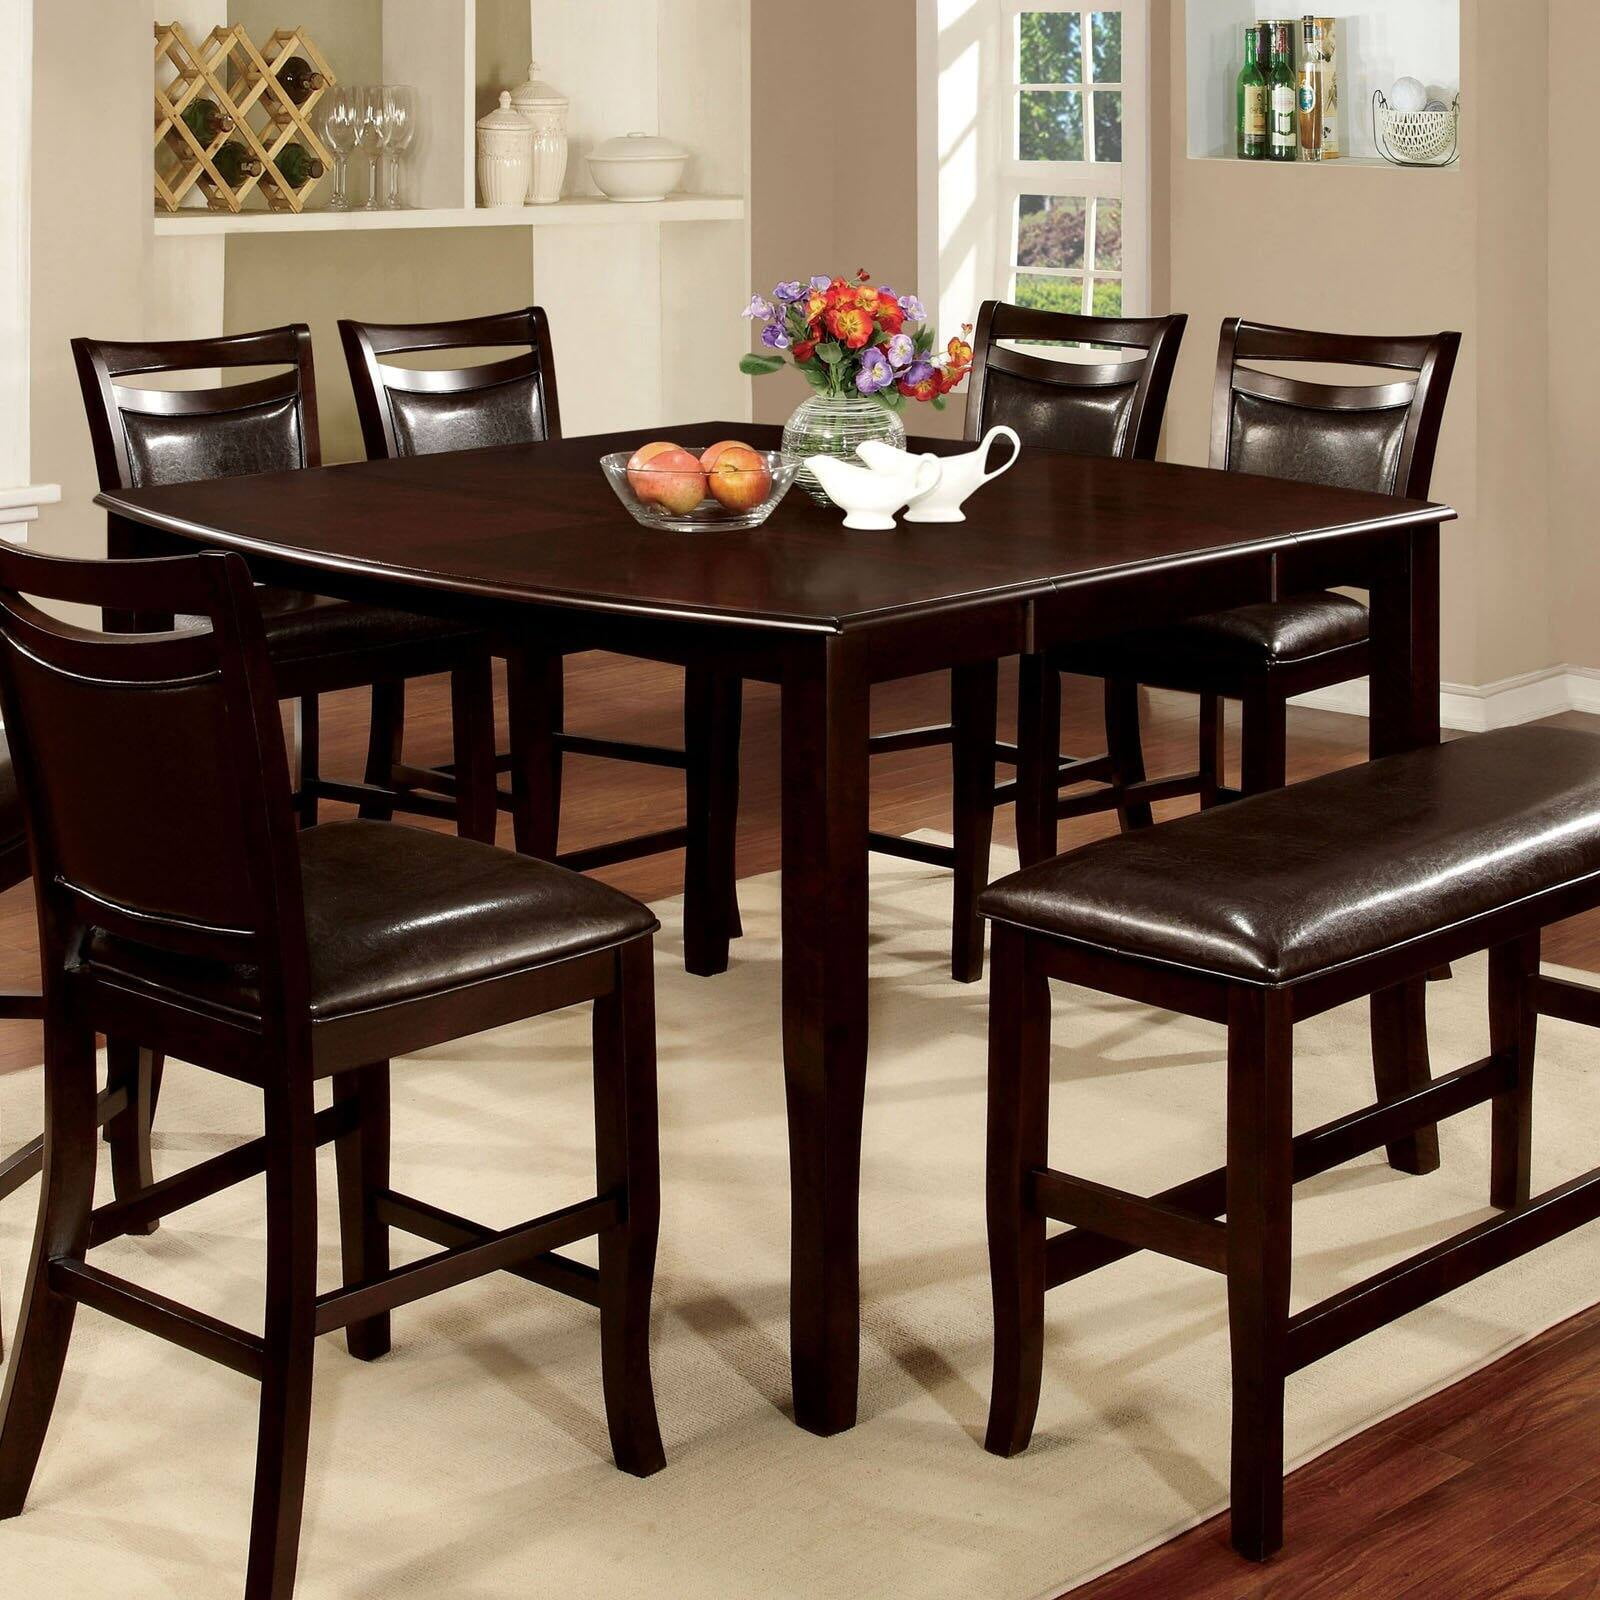 Furniture of America Ridgeway Square Counter Height Dining Table